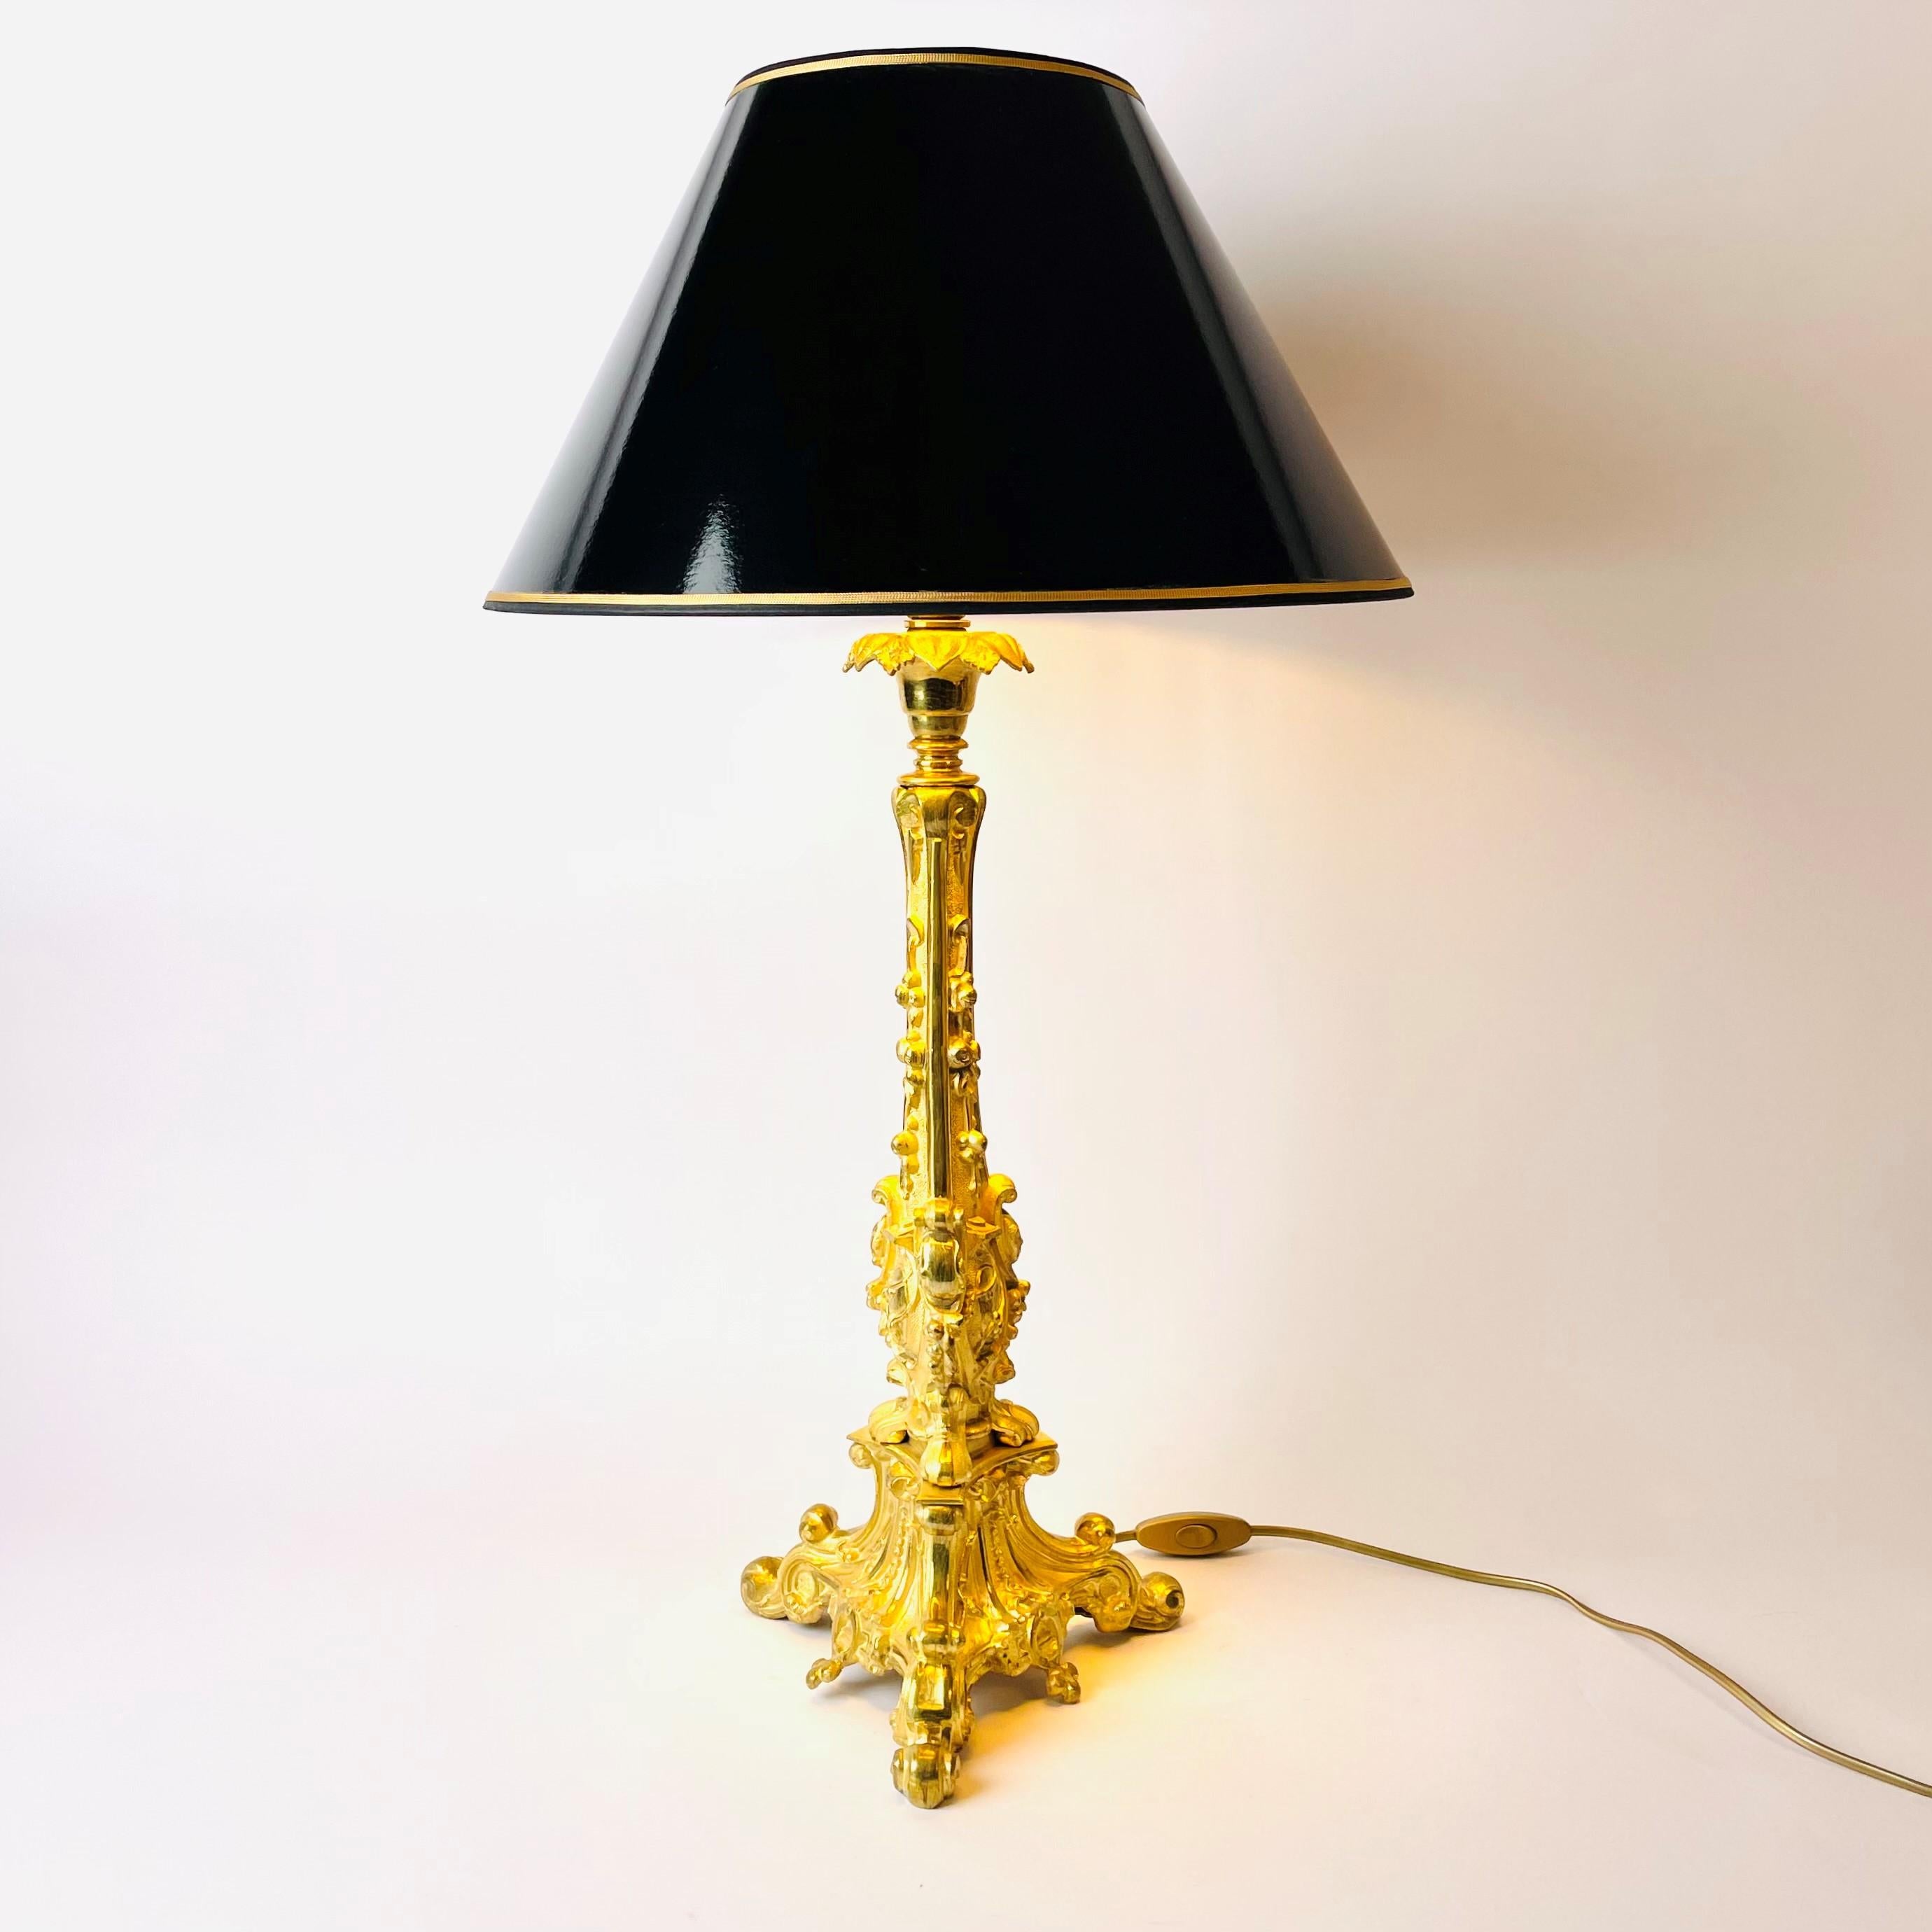 A large and beautiful Rococo Revival table lamp in gilded bronze from mid-19th century. 

Features intricate ornamentation in gilt bronze of typical Rococo floral patterns, flowing upwards from the base of three legs.

The new black lacquer shade is